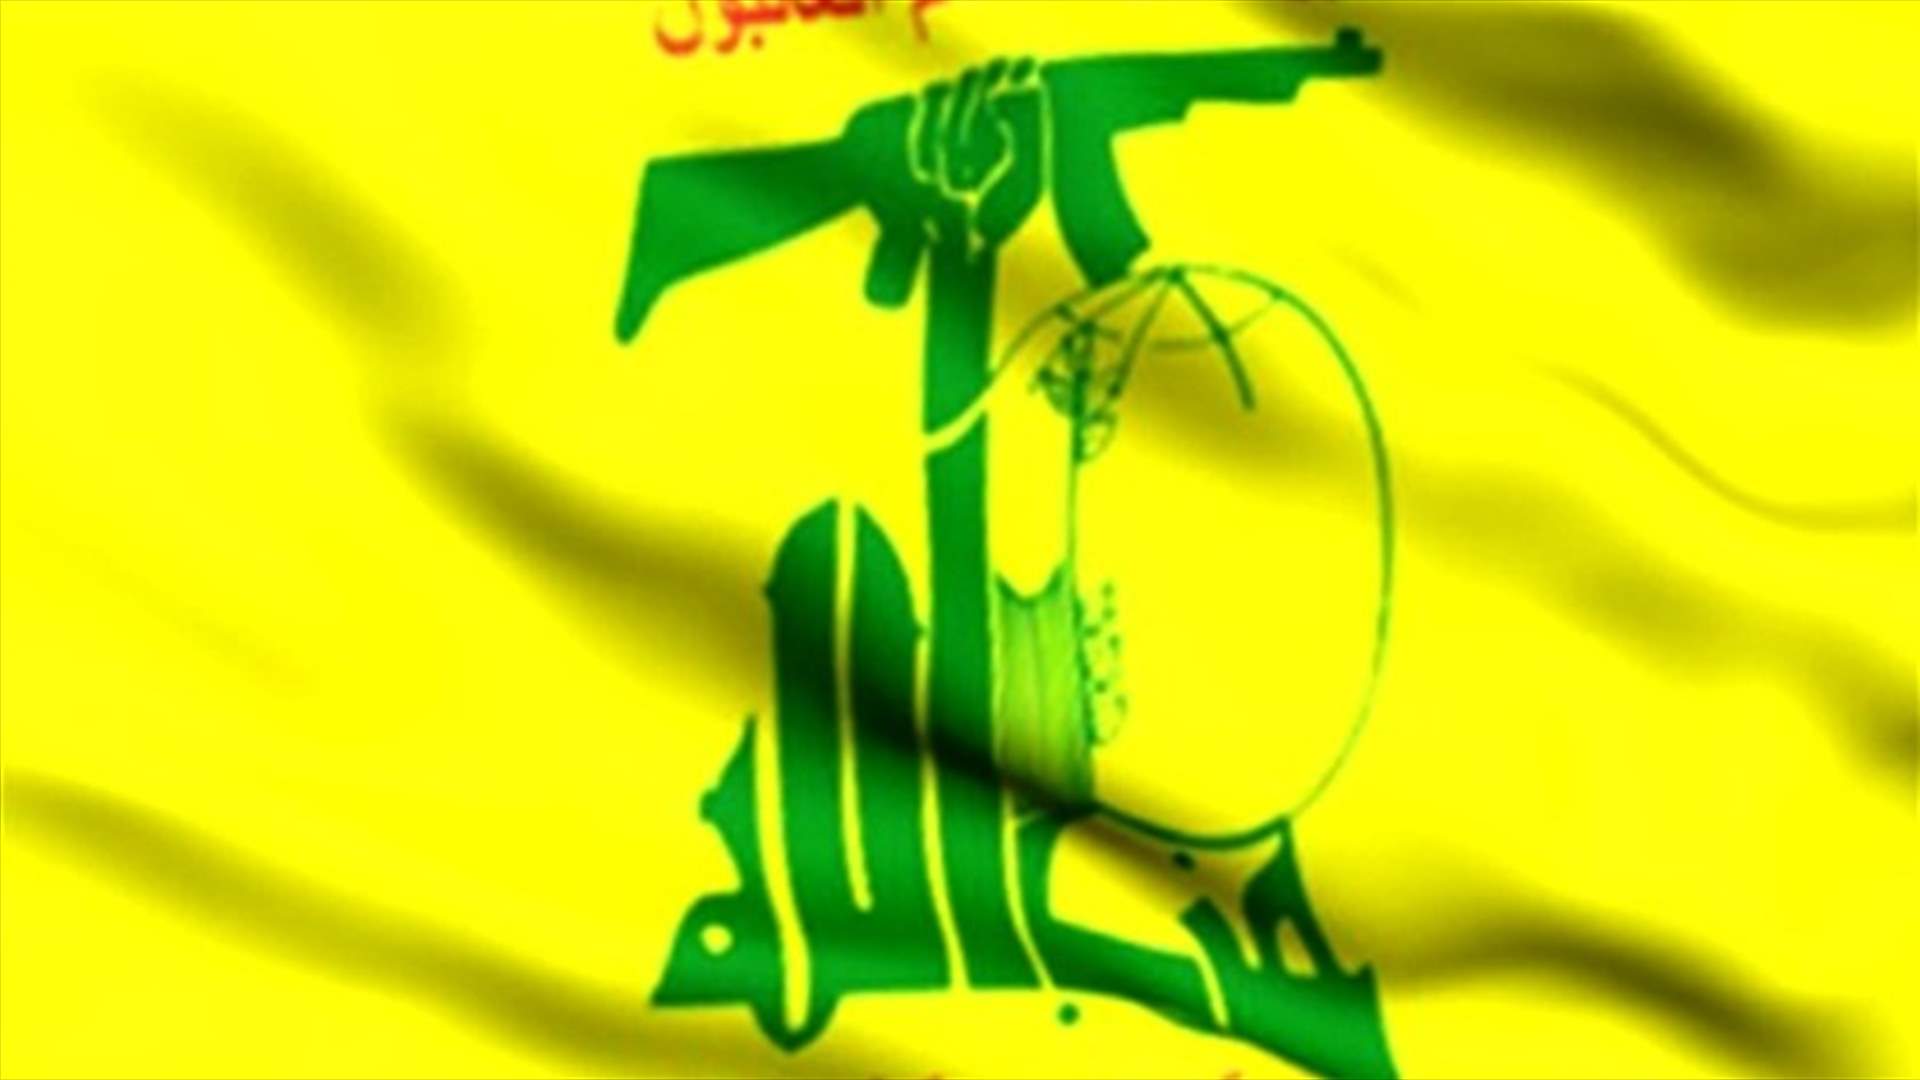 Hezbollah condemns airport attack, calls for regional solidarity to face terrorism